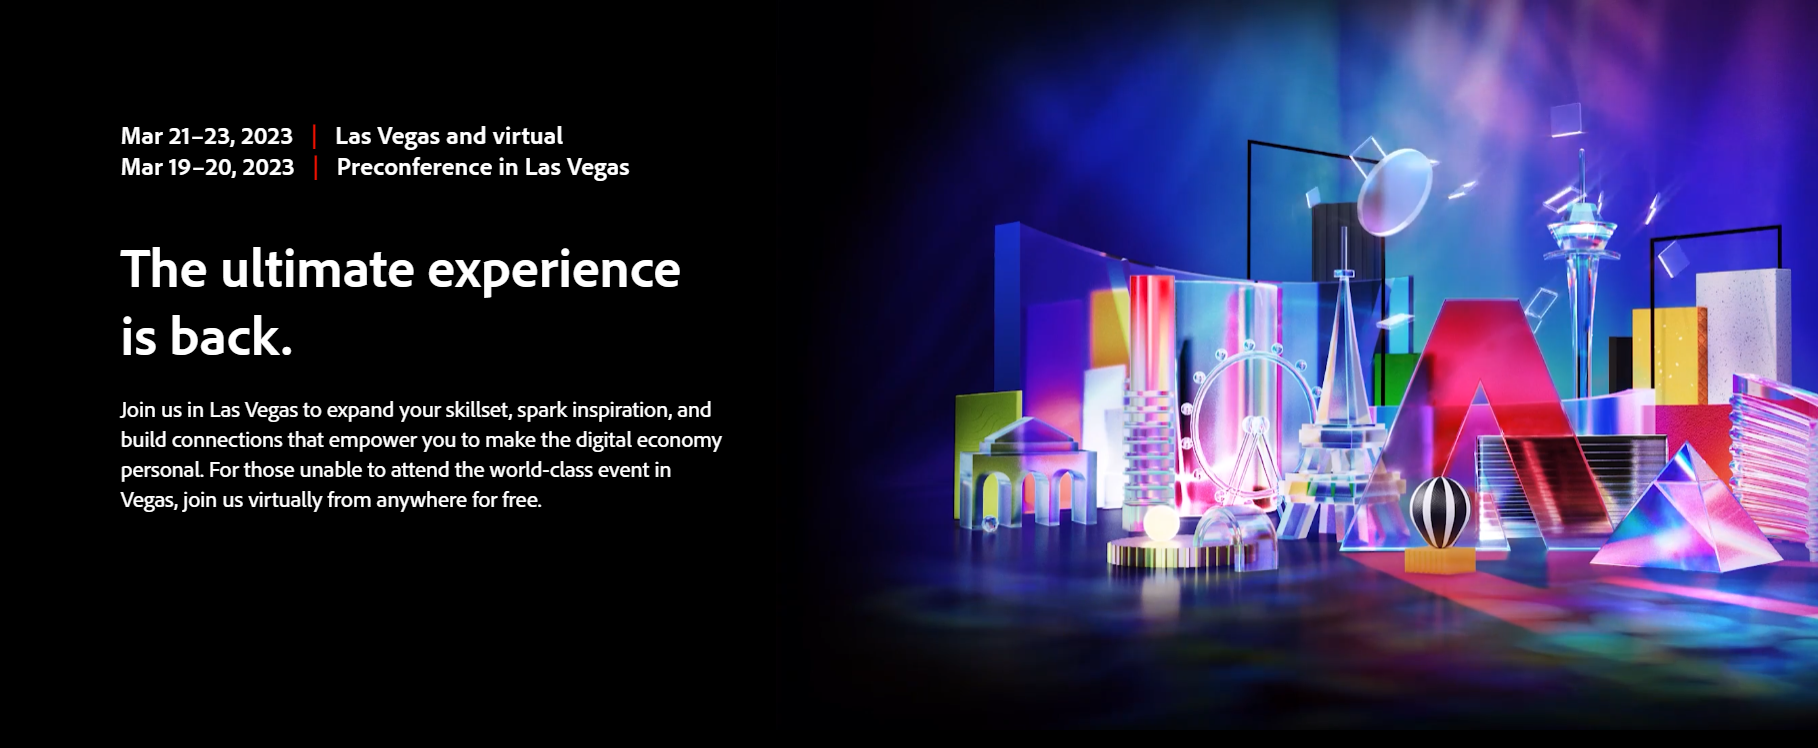 Adobe Summit 2023. The ultimate experience is back.